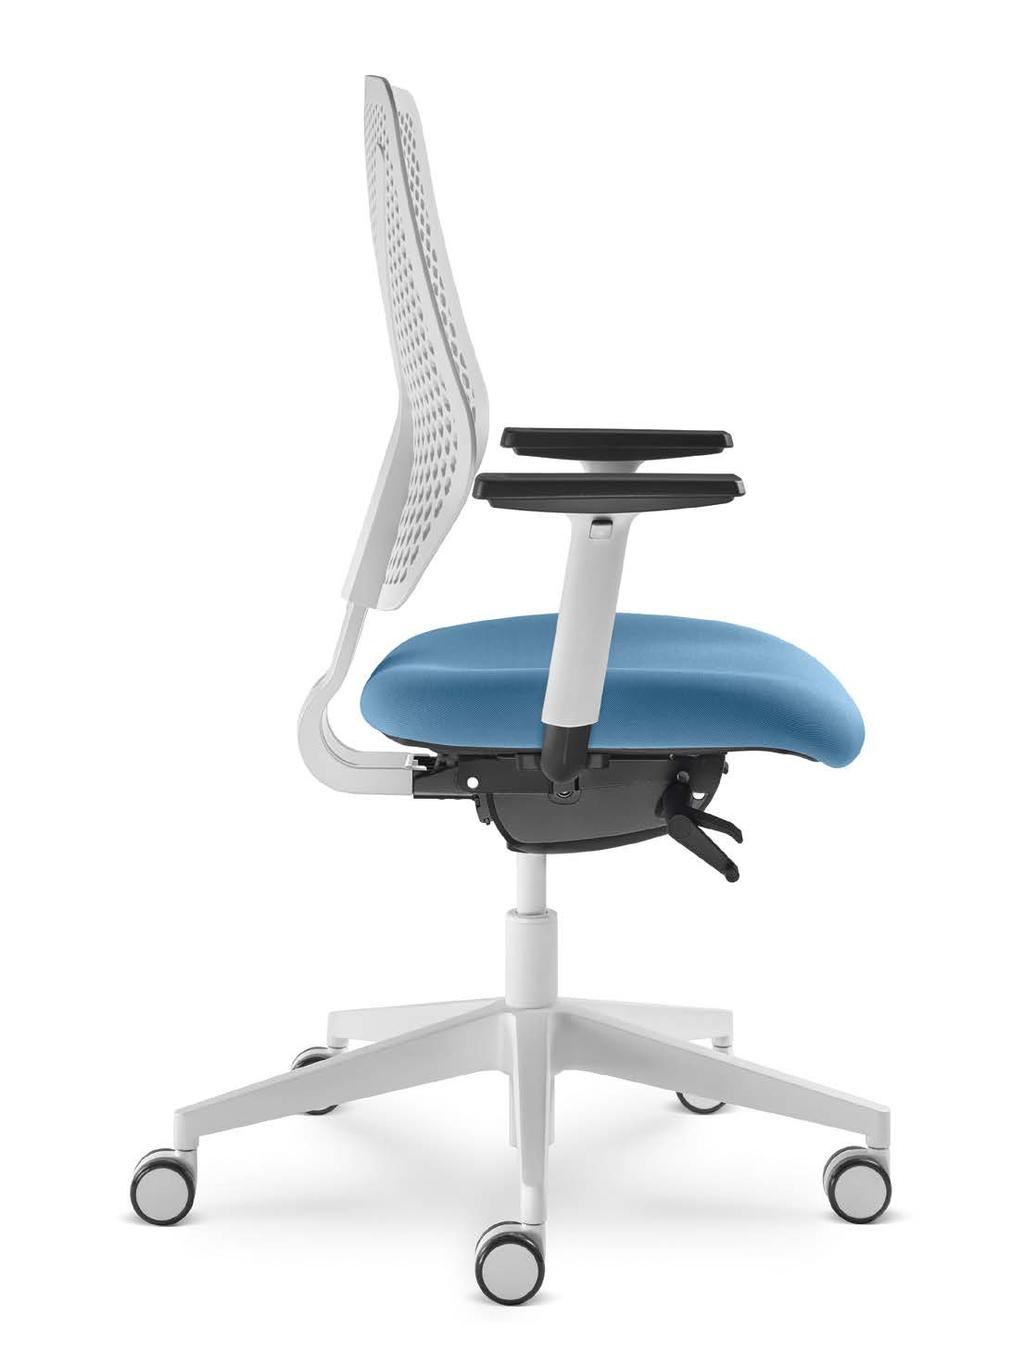 The backrest in the Why chair is pleasantly flexible, perfectly shaped in the lumber area and height adjustable thanks to a reliable and precise push-button controlled mechanism.